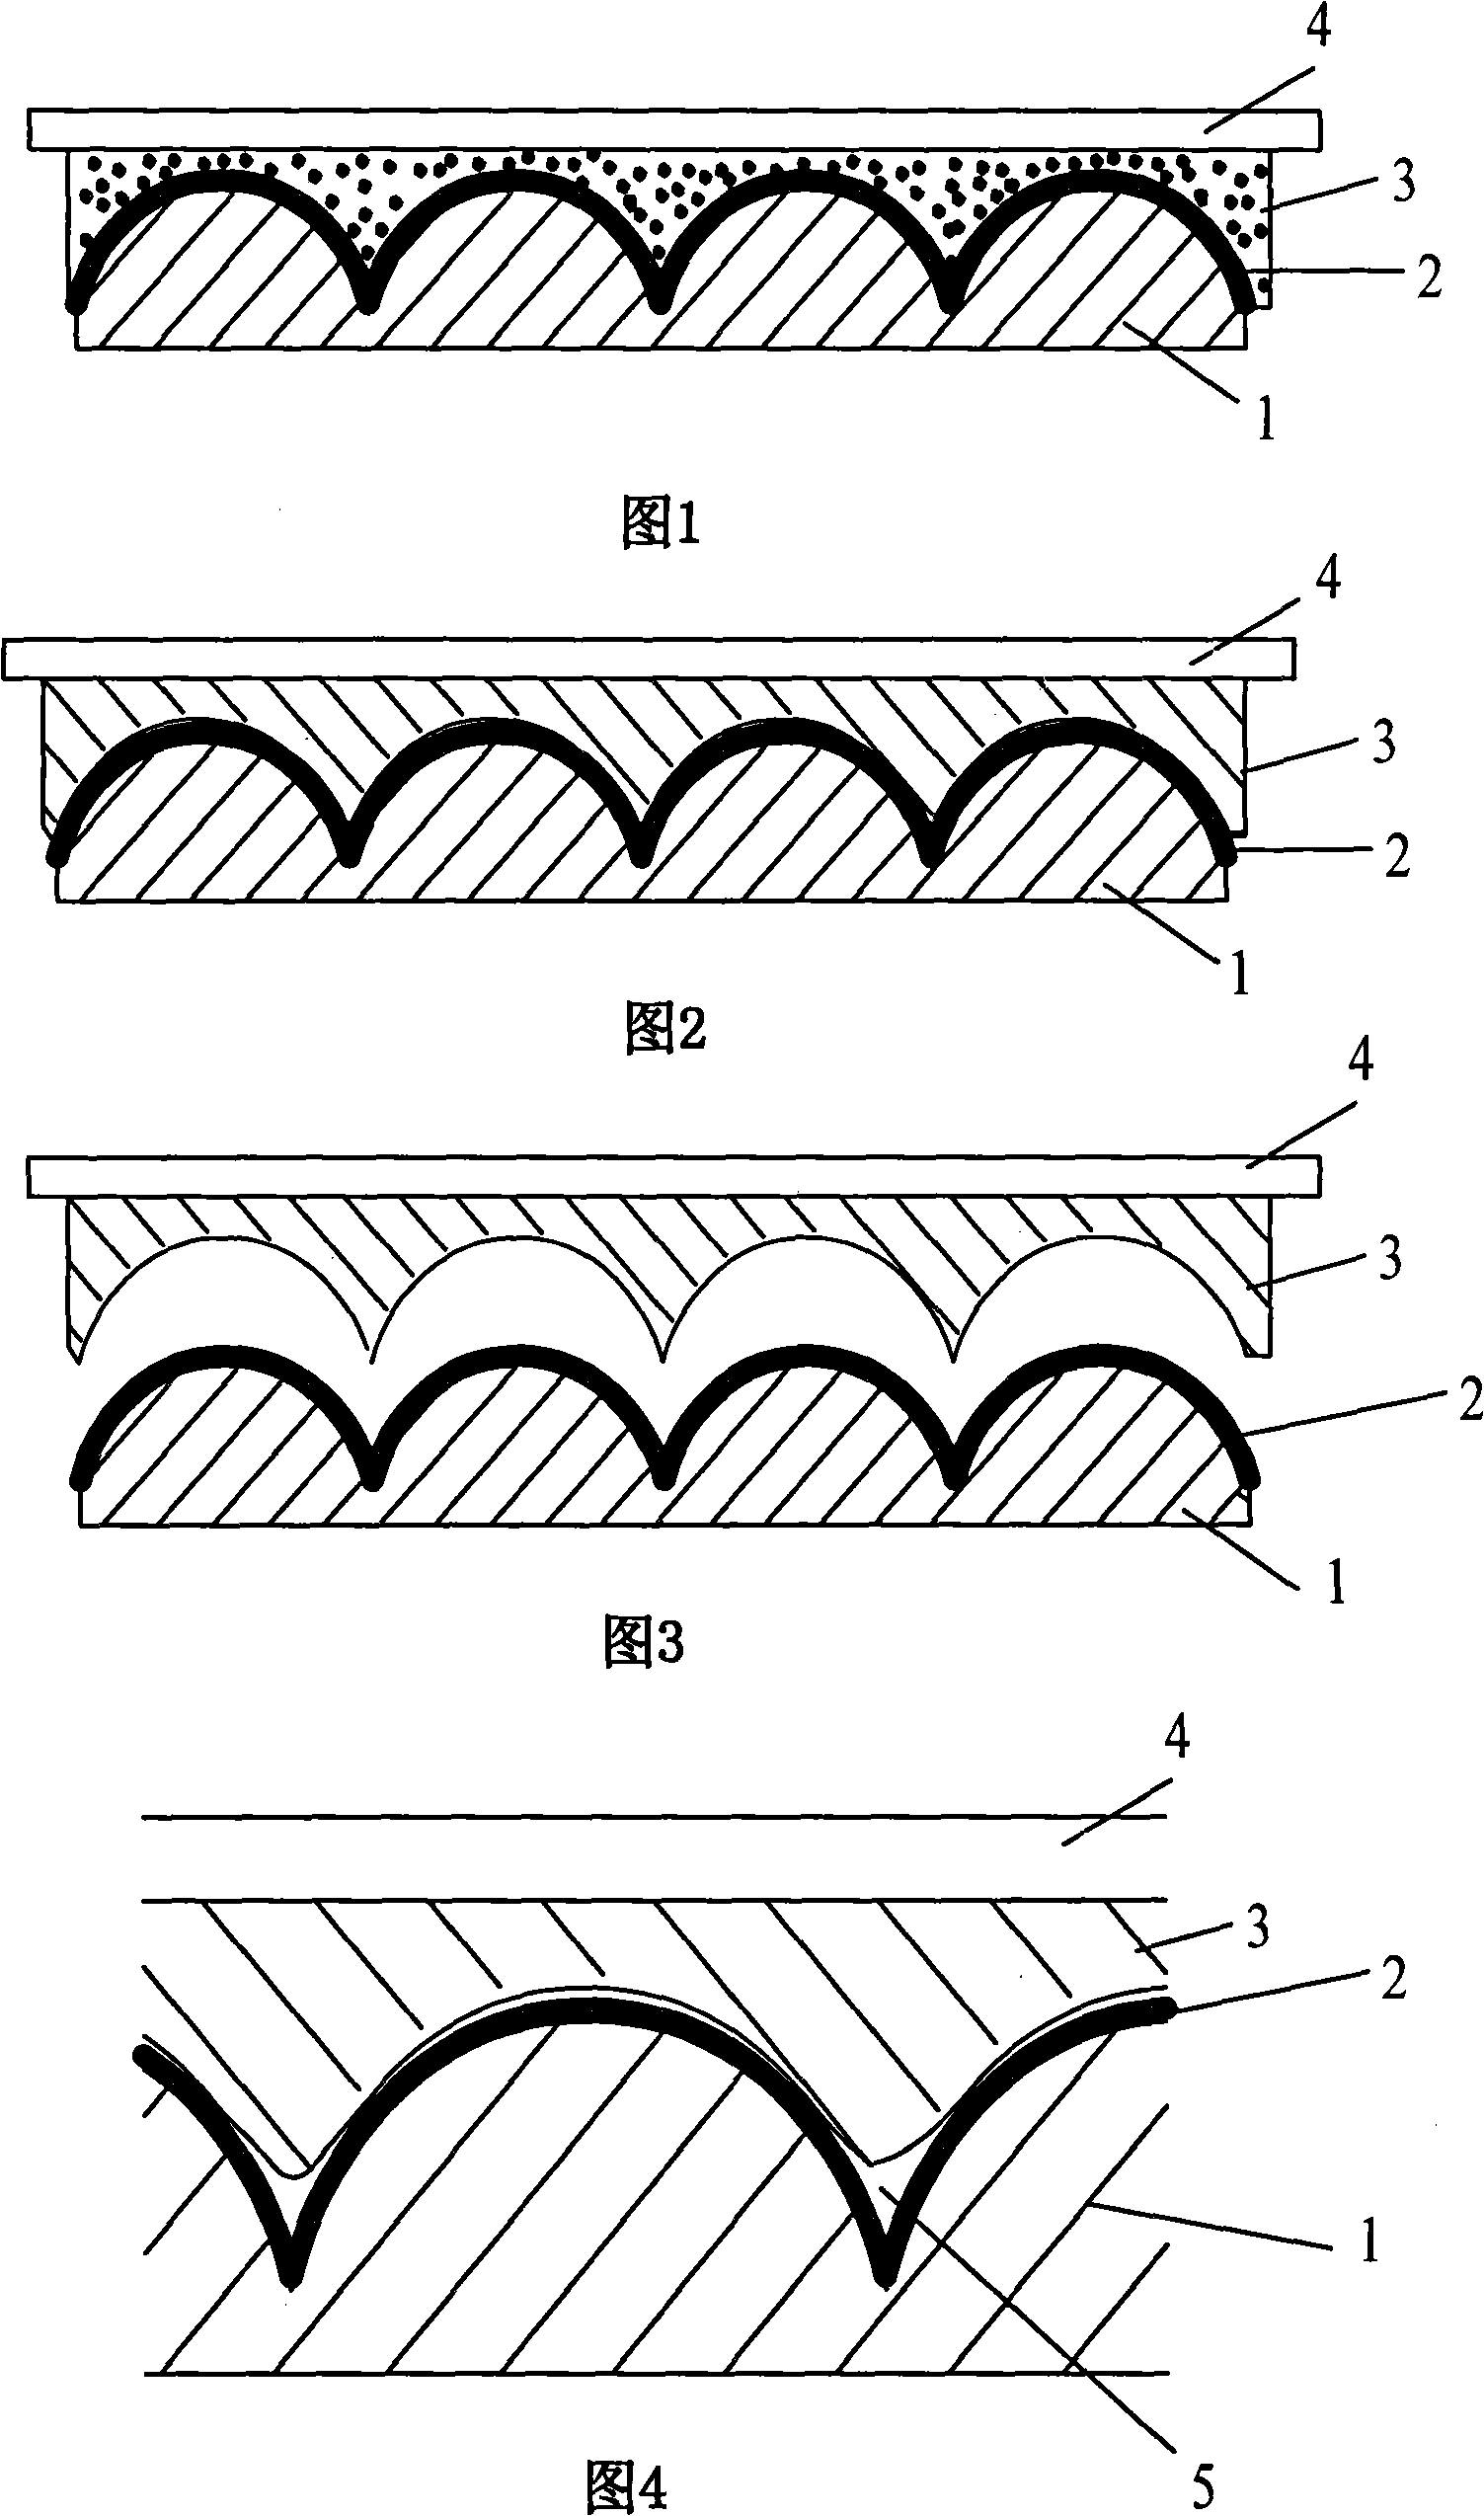 Method for manufacturing microlens array